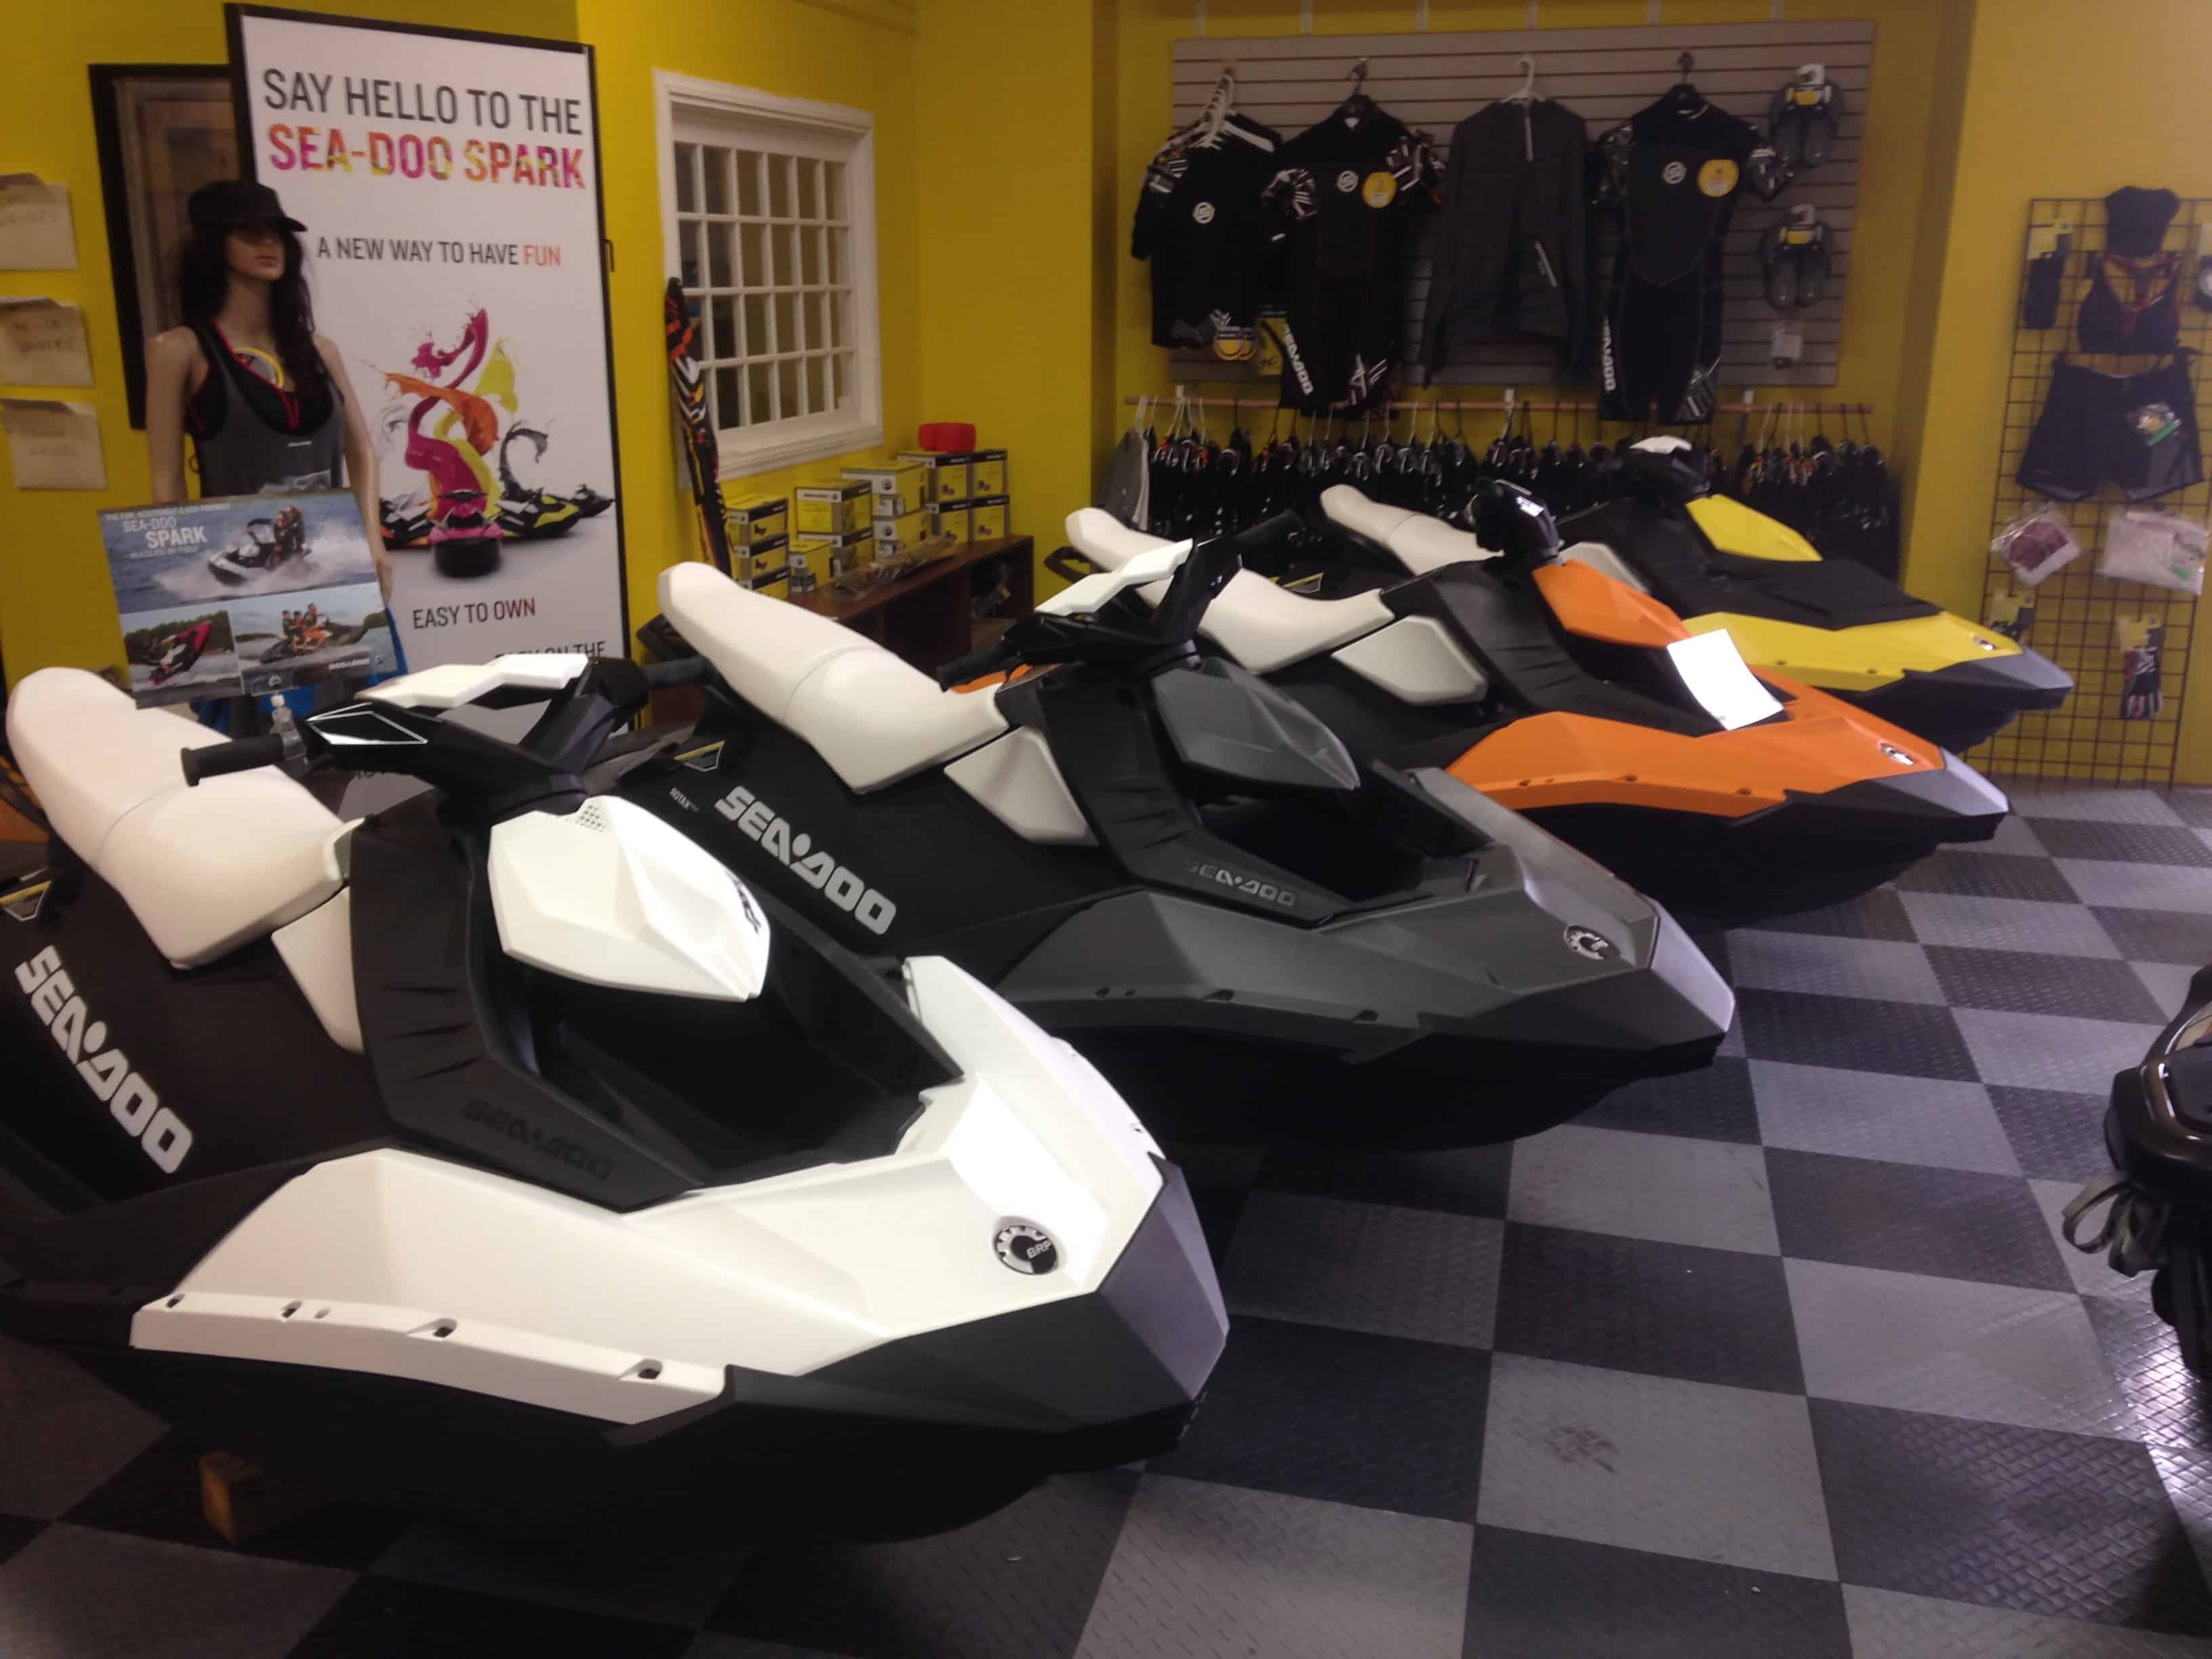 Seadoo Sparks for sale